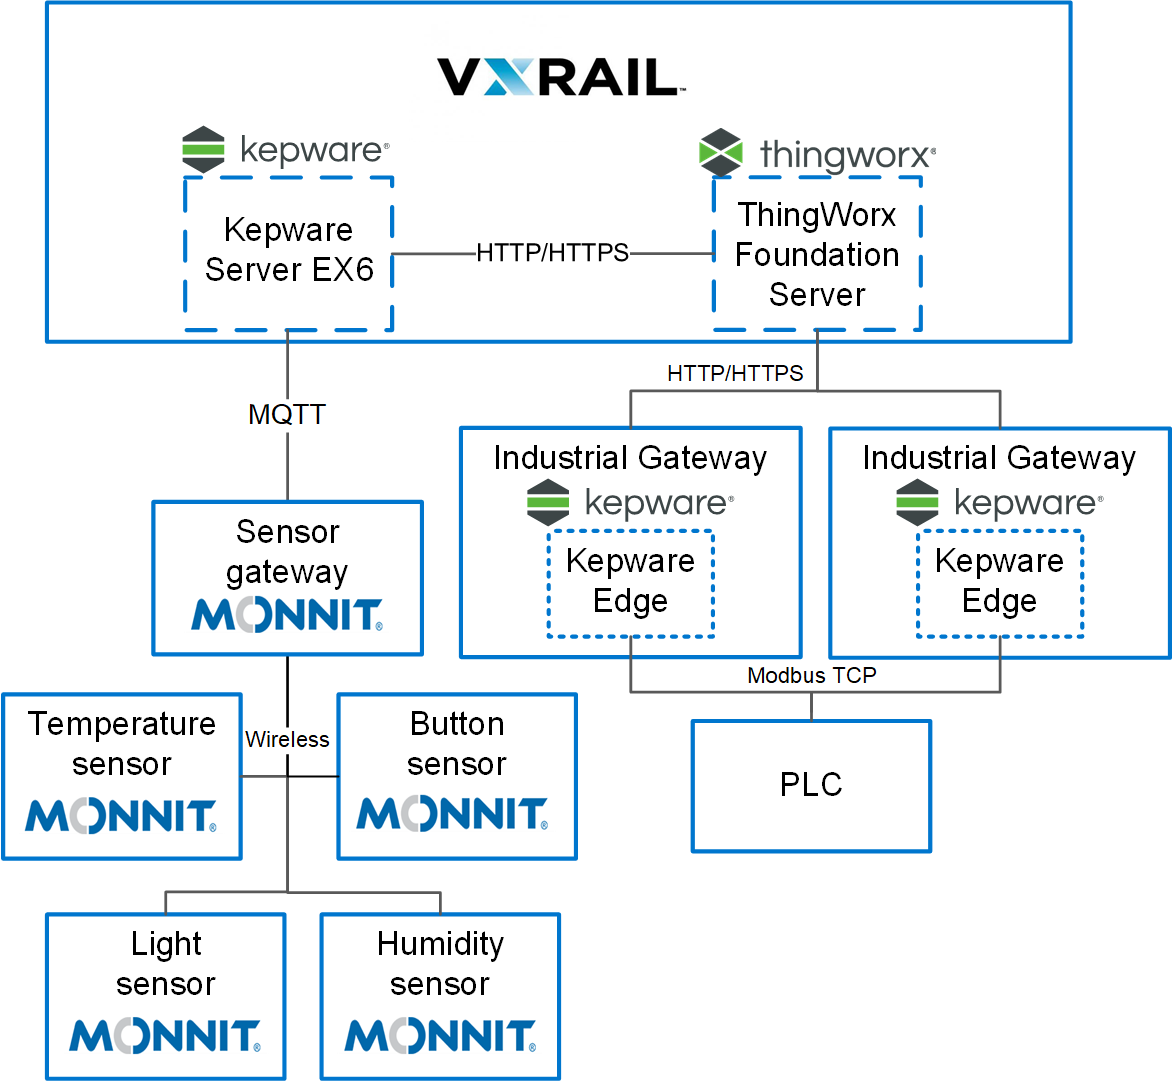 VxRail with PTC architecture including sensors gathering edge